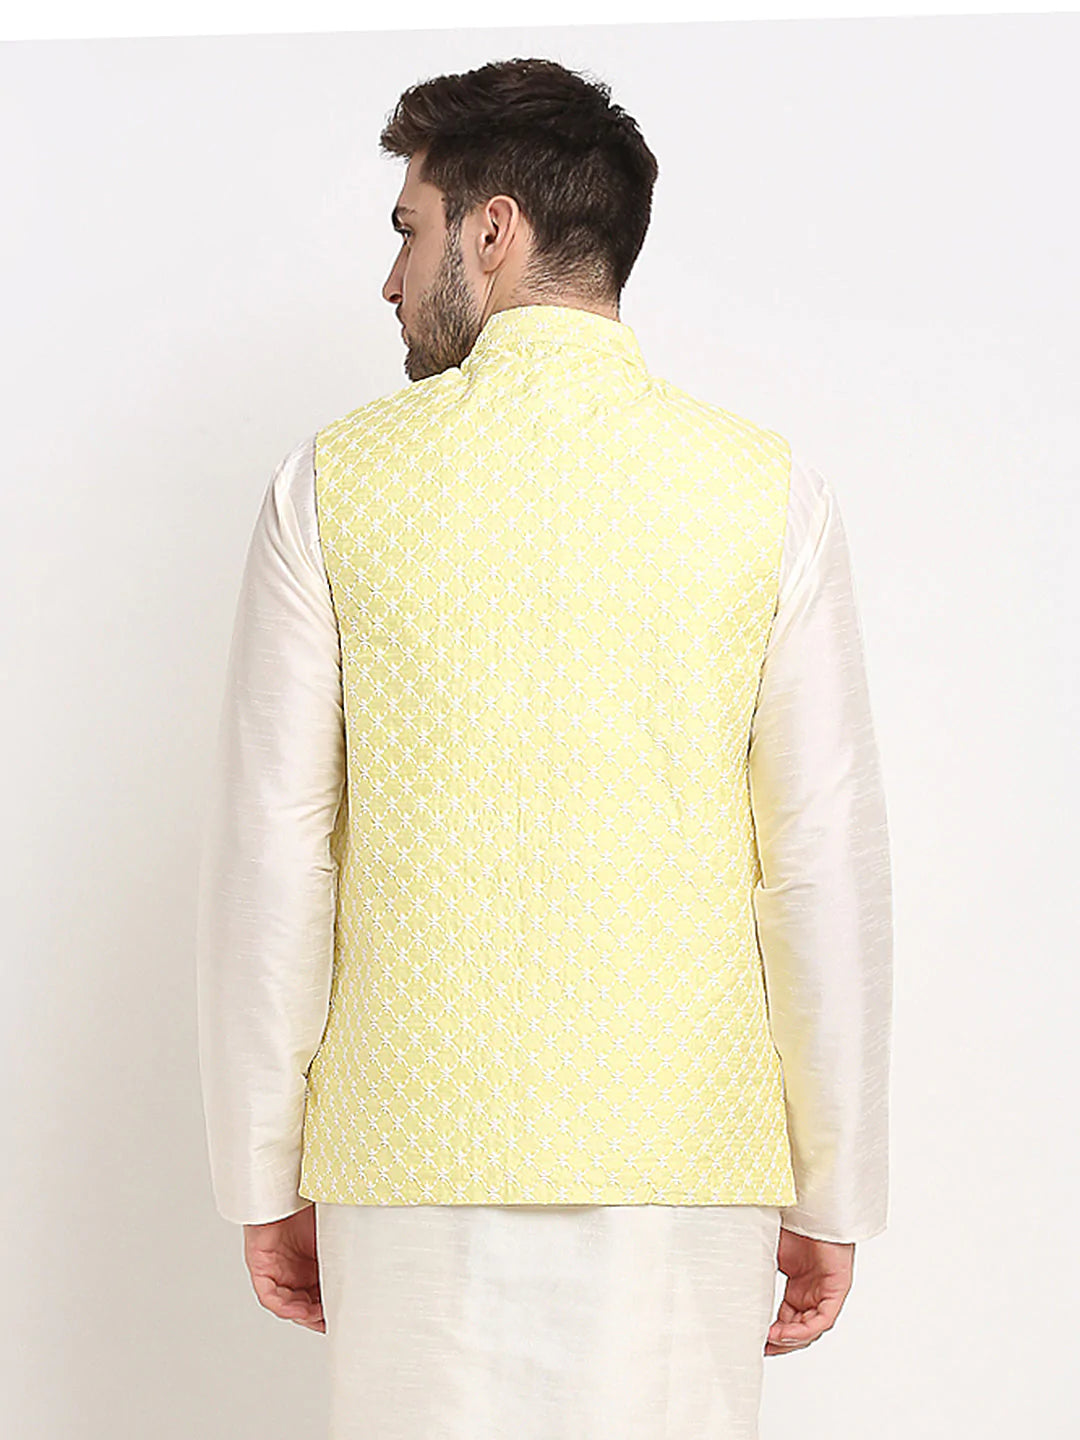 Jompers Men's Yellow Yellow and White Embroidered Nehru Jacket ( JOWC 4029Yellow )